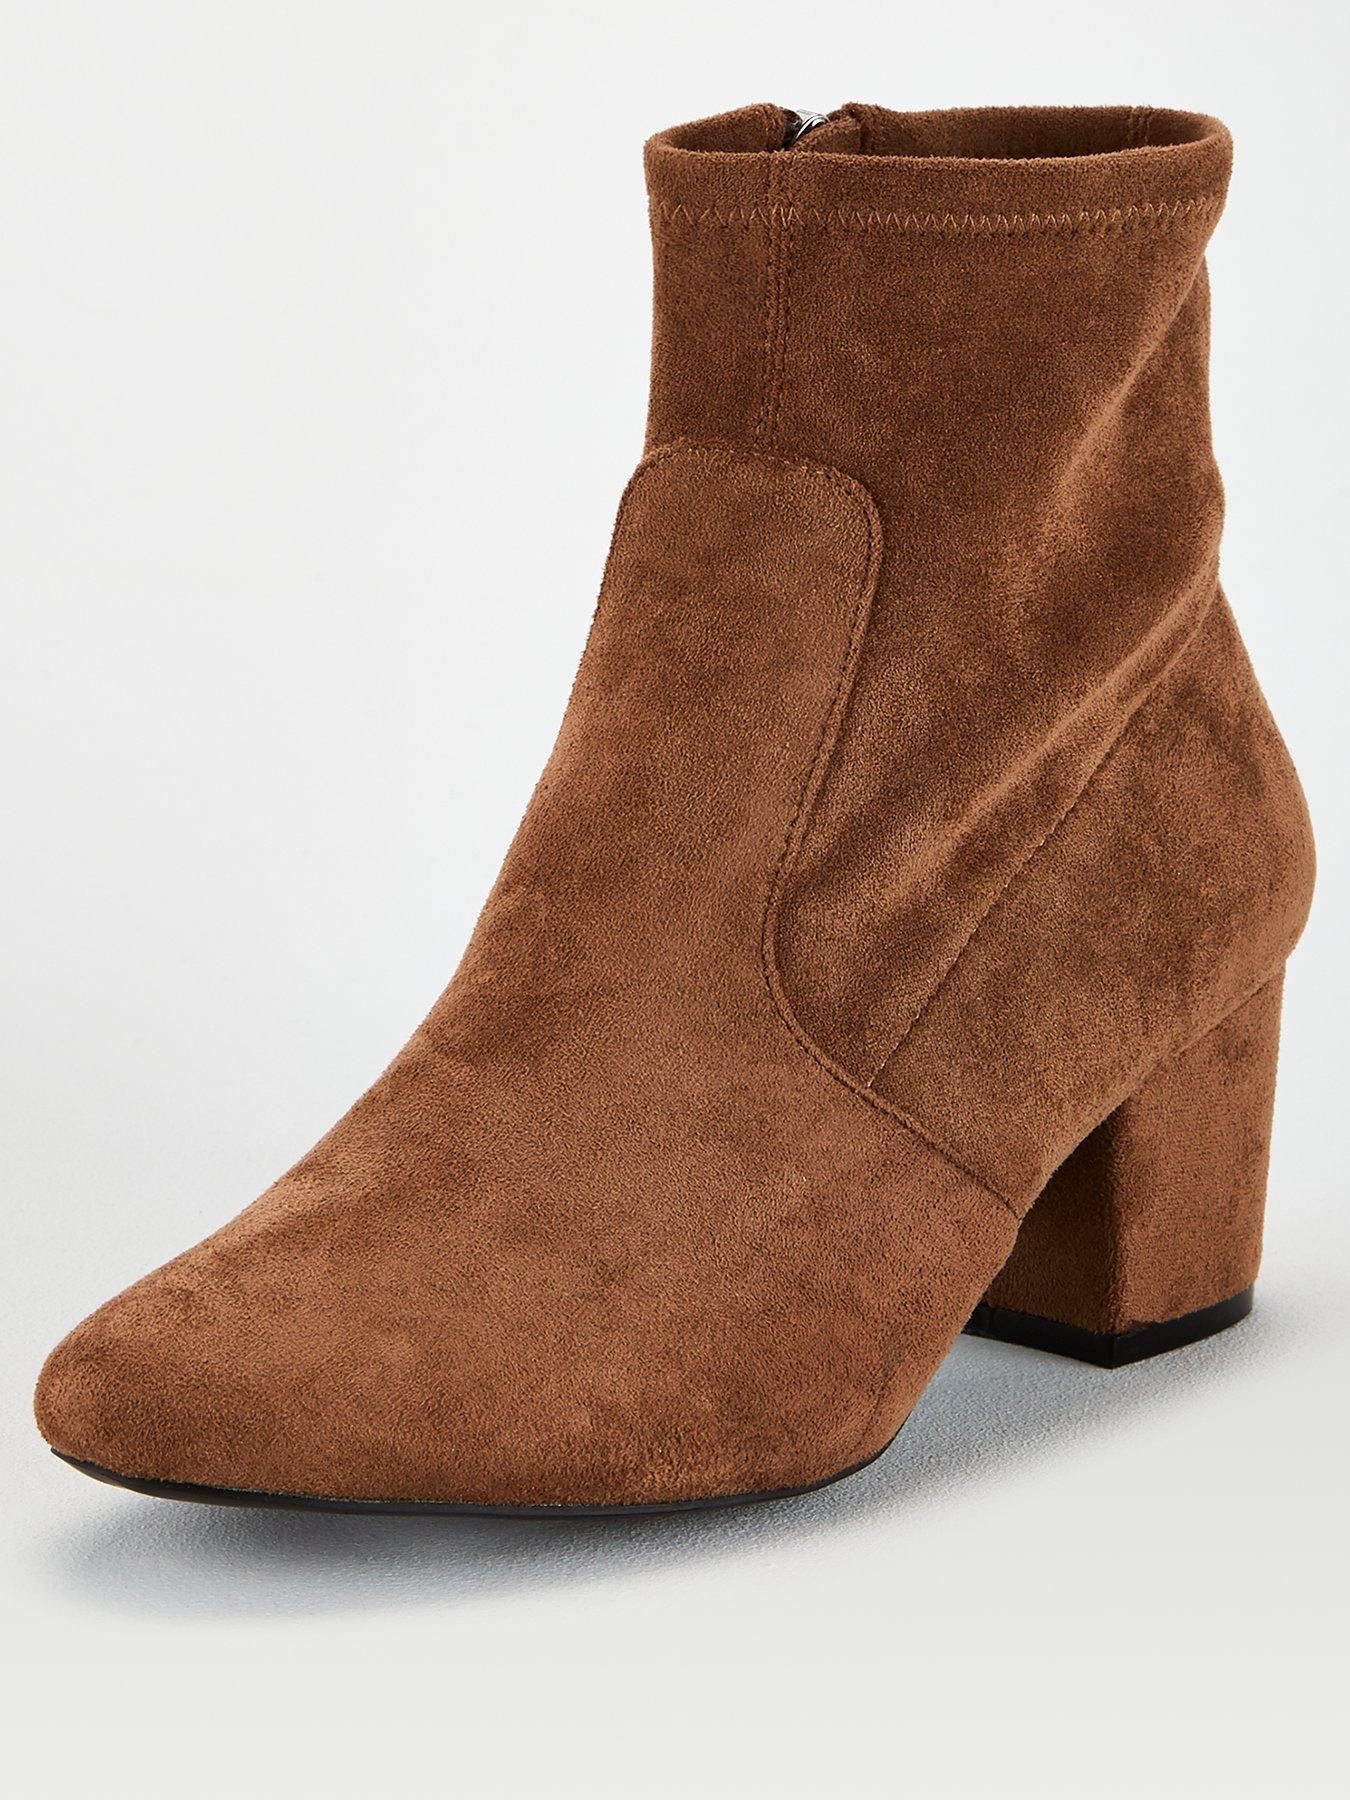 comfy ankle boots uk